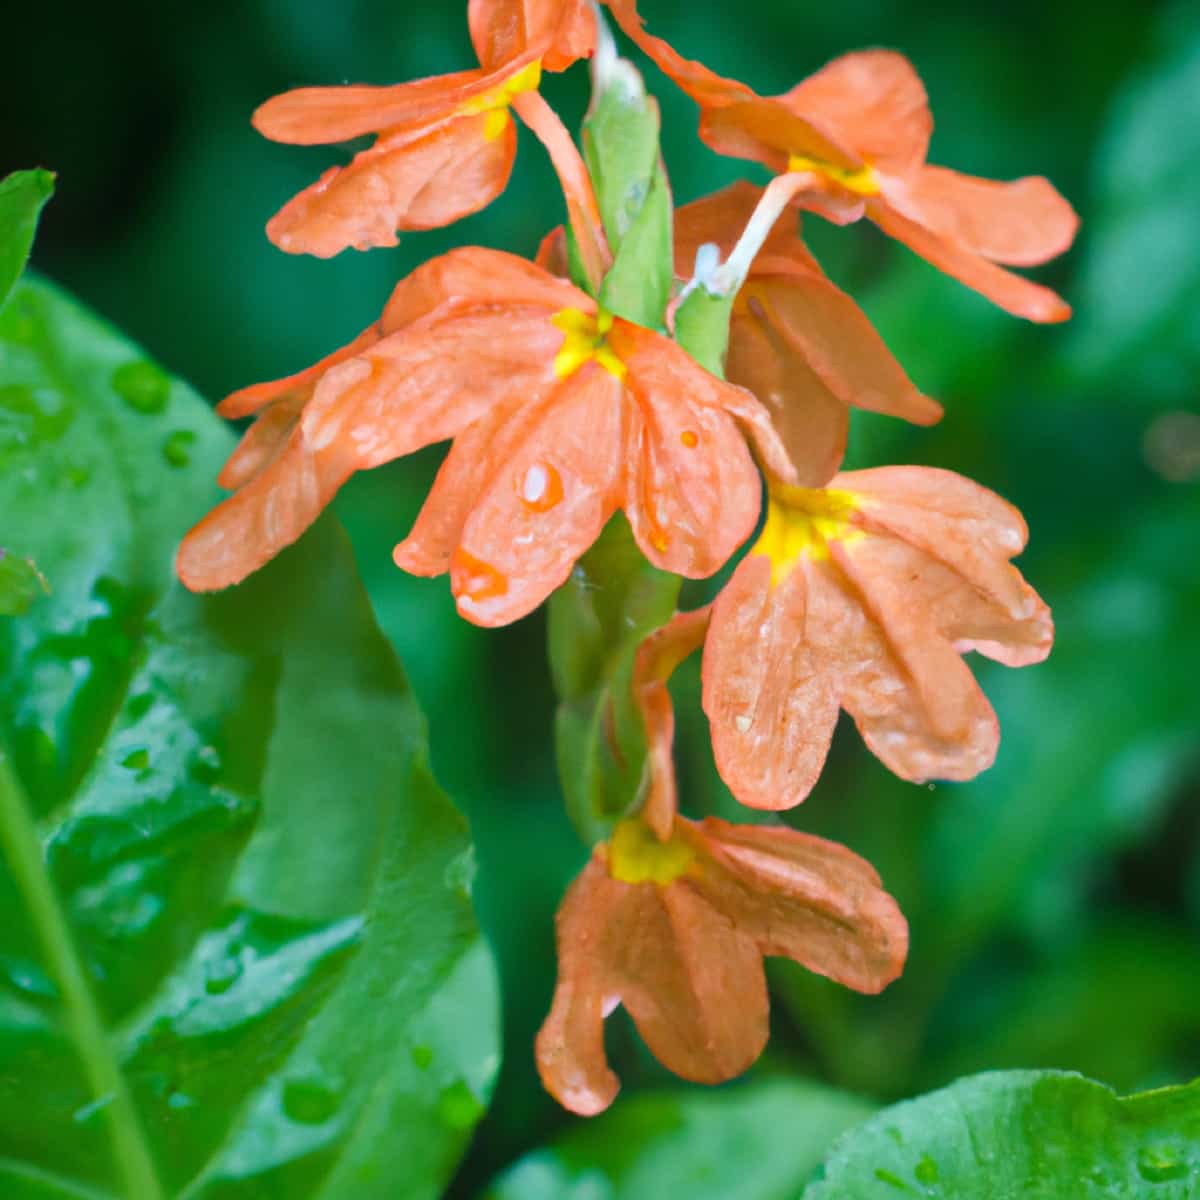 How to Identify and Treat Crossandra Pests